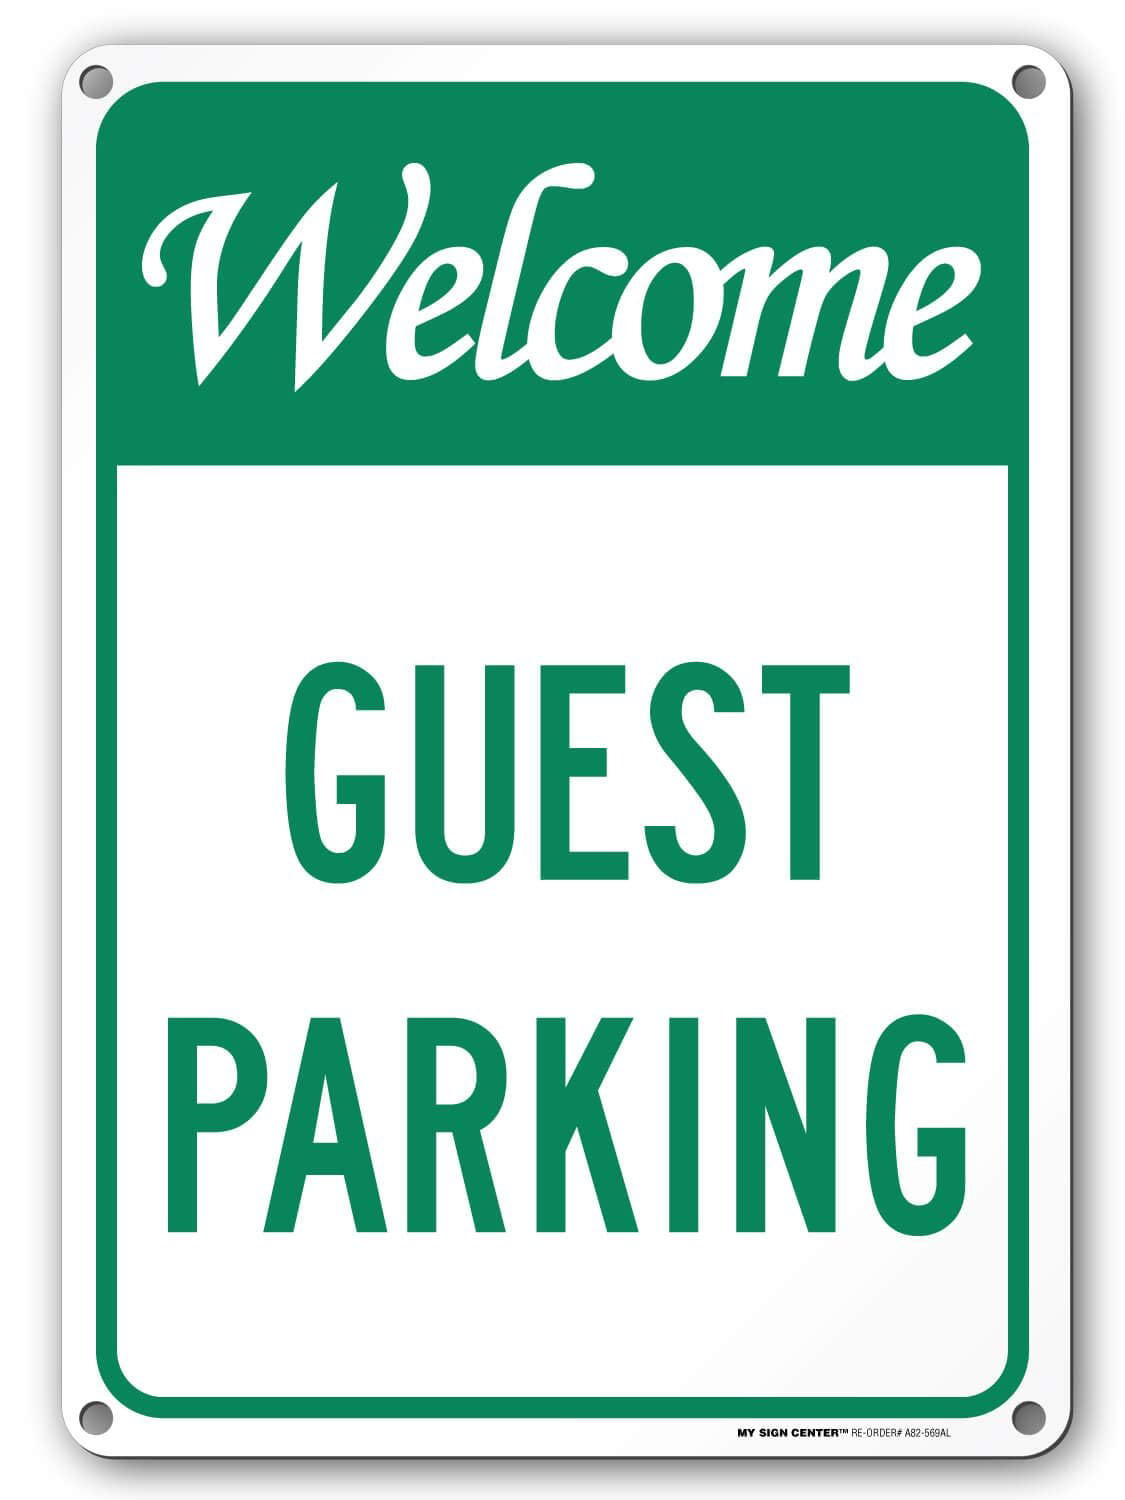 Welcome Visitor Parking w/Double Arrow 8x12 Aluminum Sign Made in USA UV Protctd 